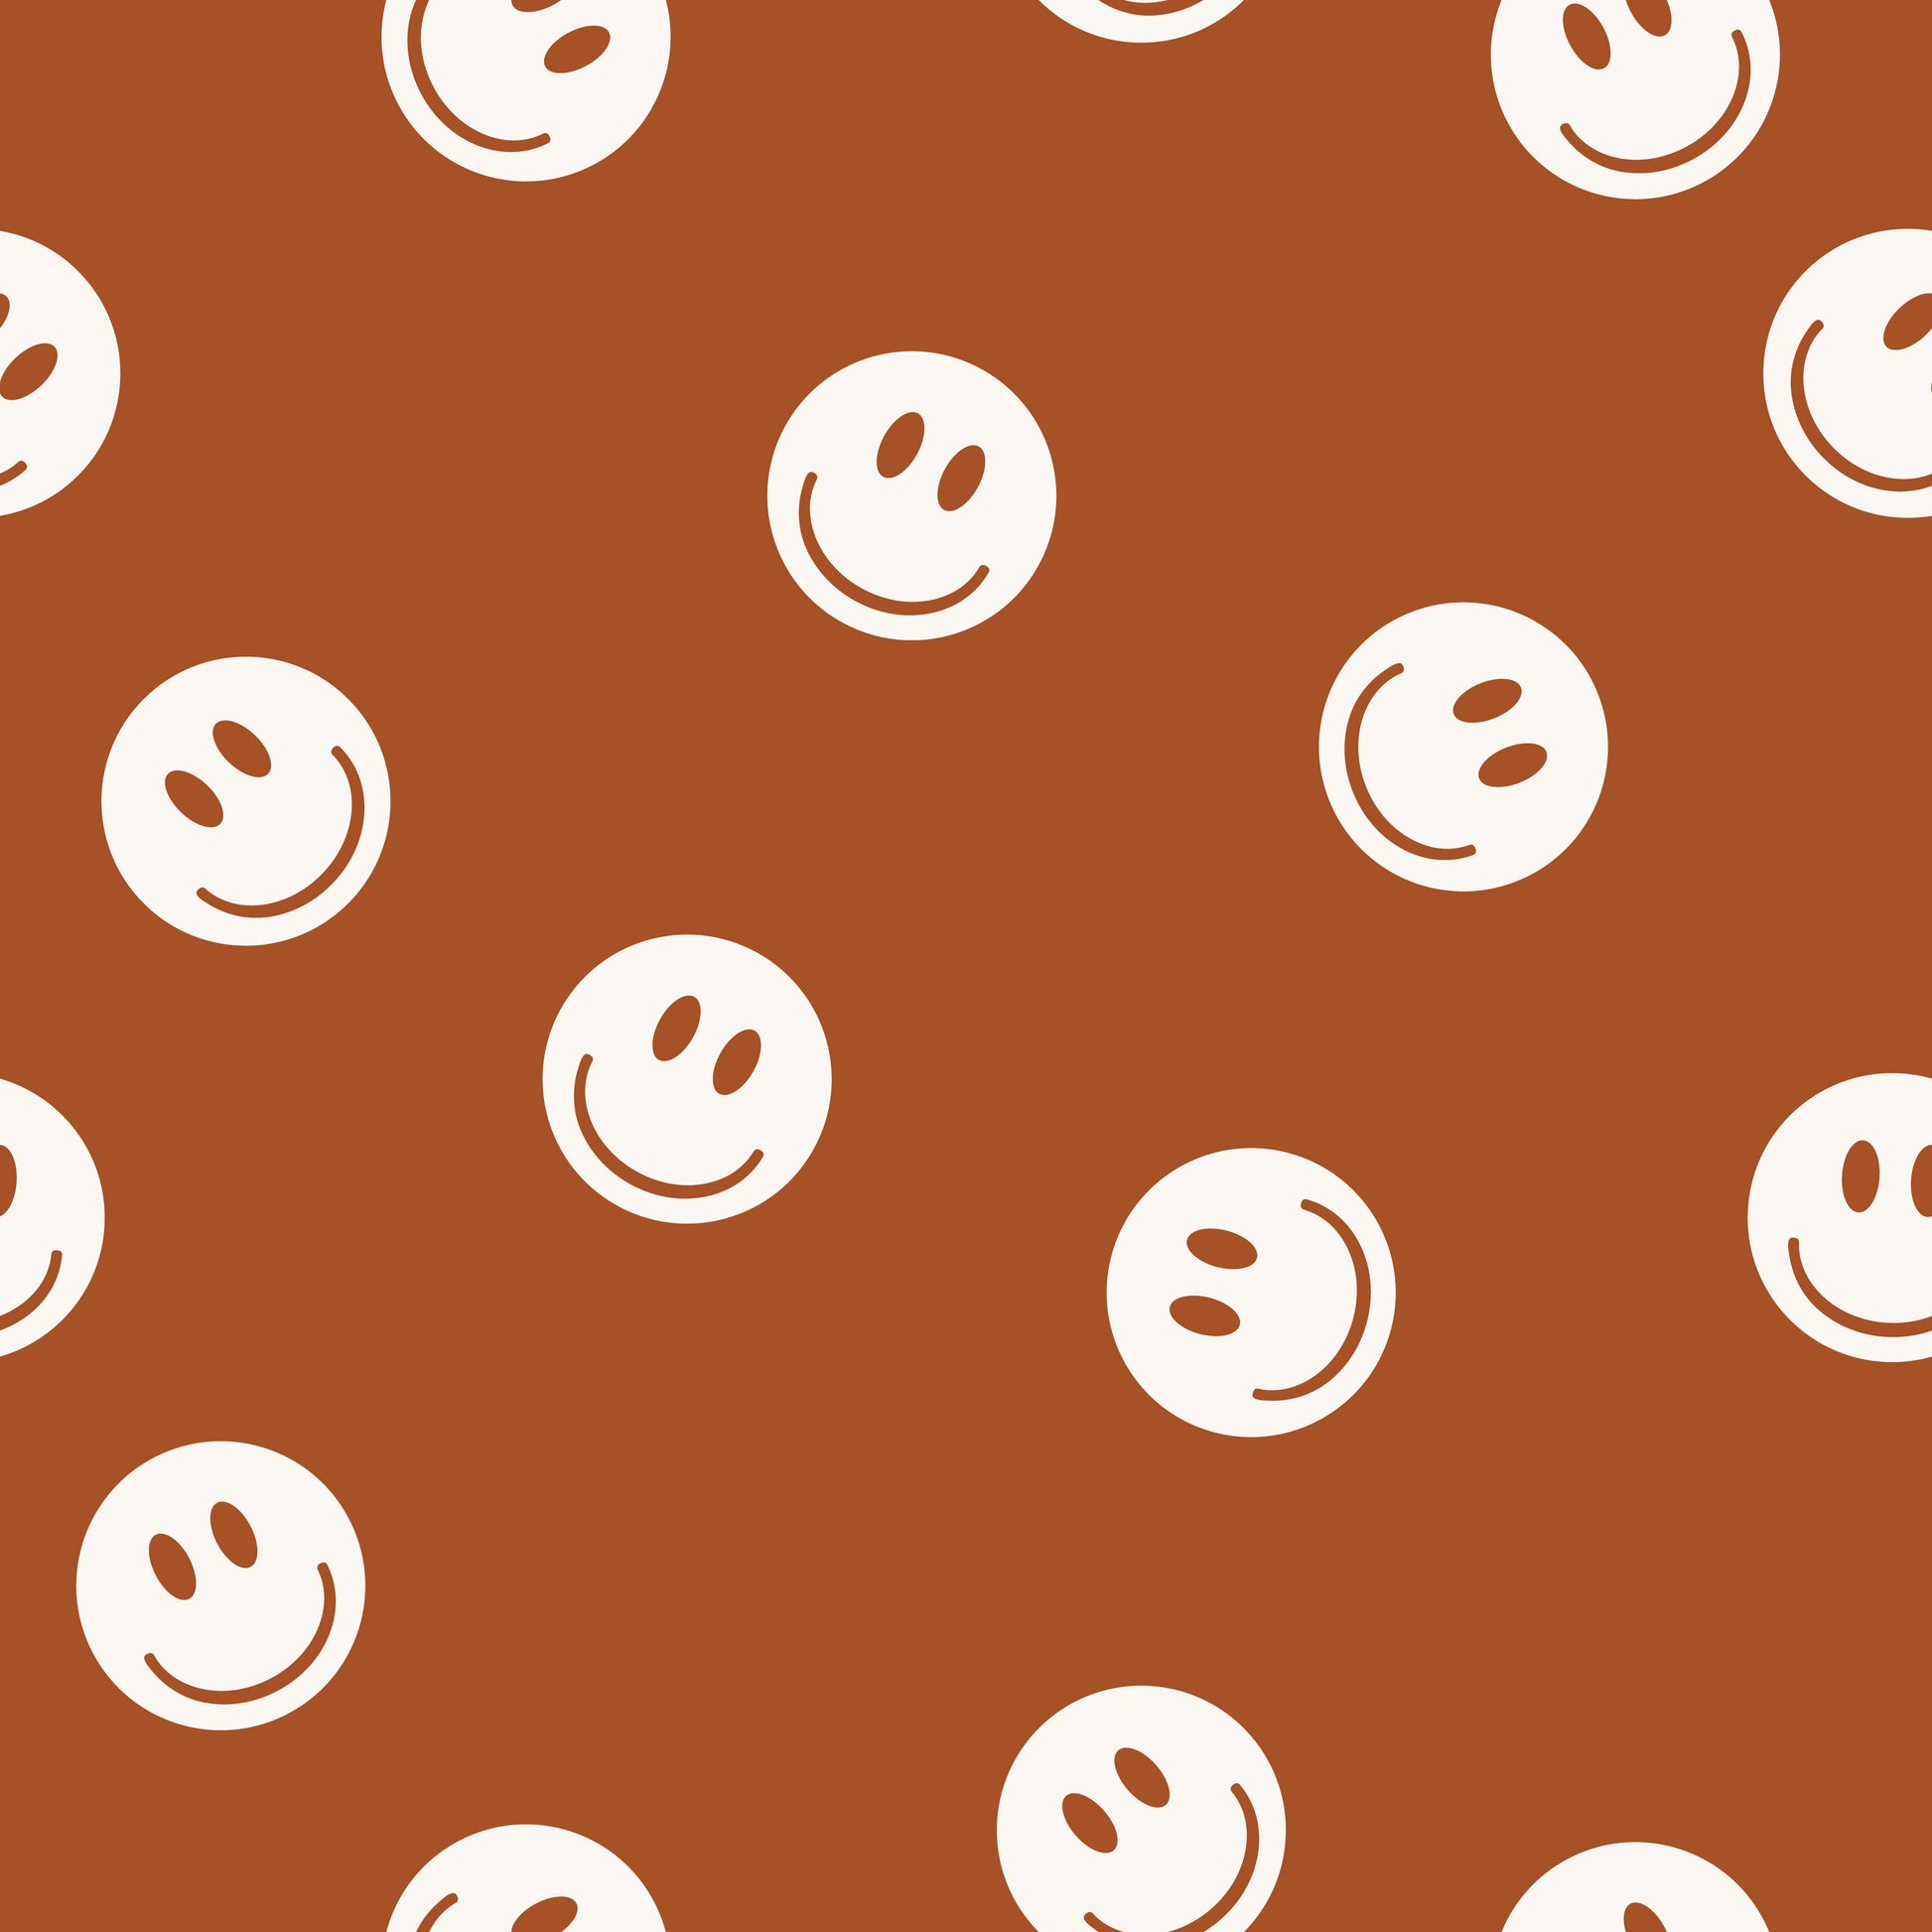 Rust background with wihte smiley faces